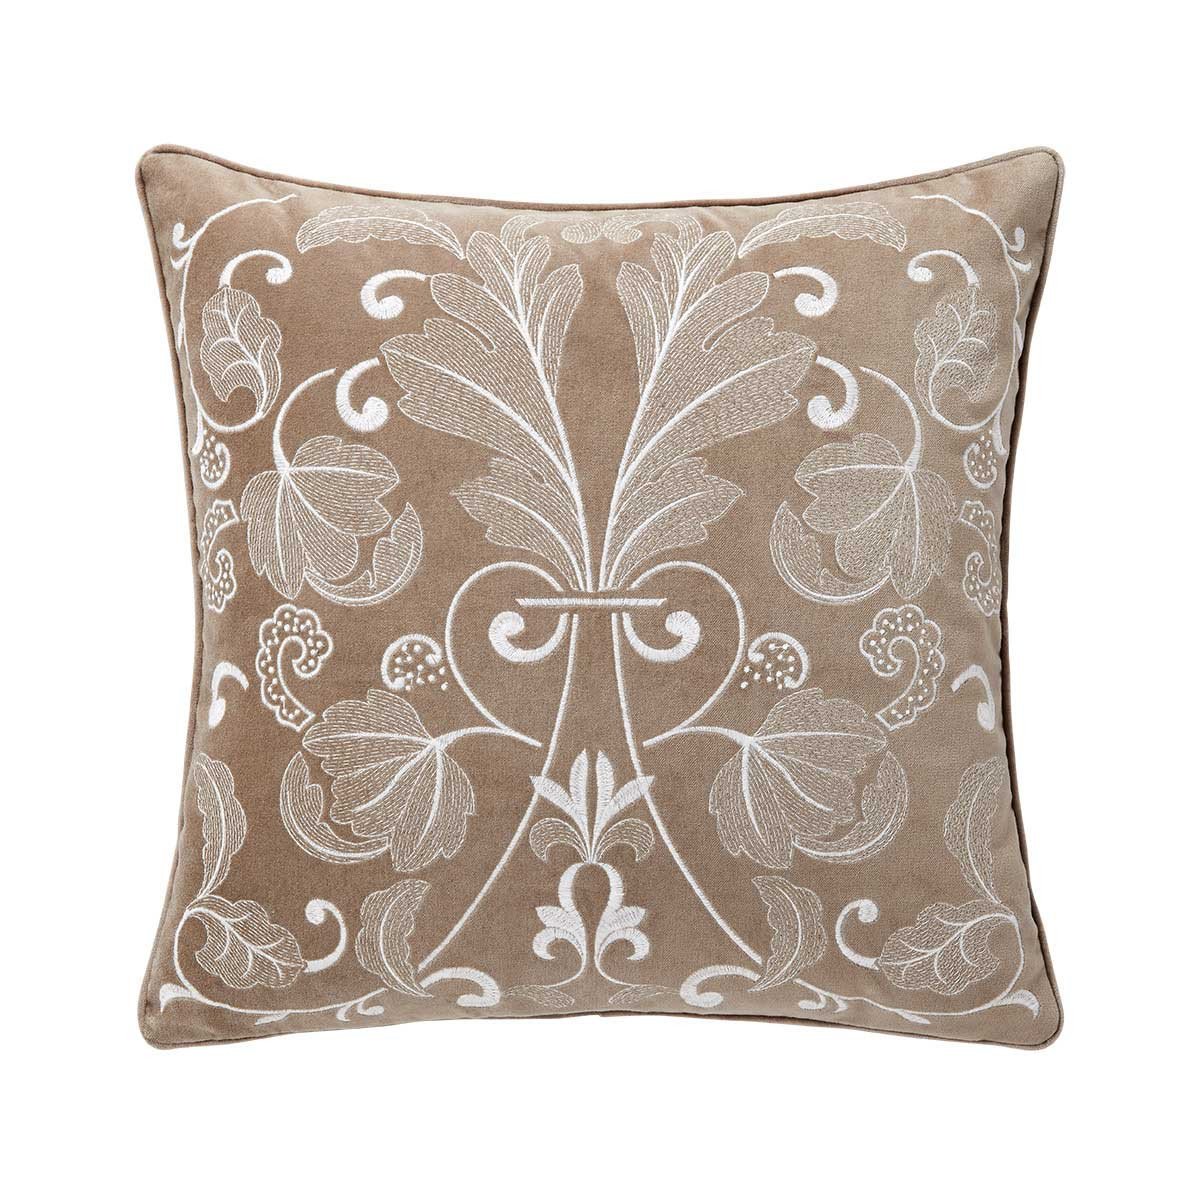 Tenue Chic Decorative Pillow by Yves Delorme | Fig Linens and Home